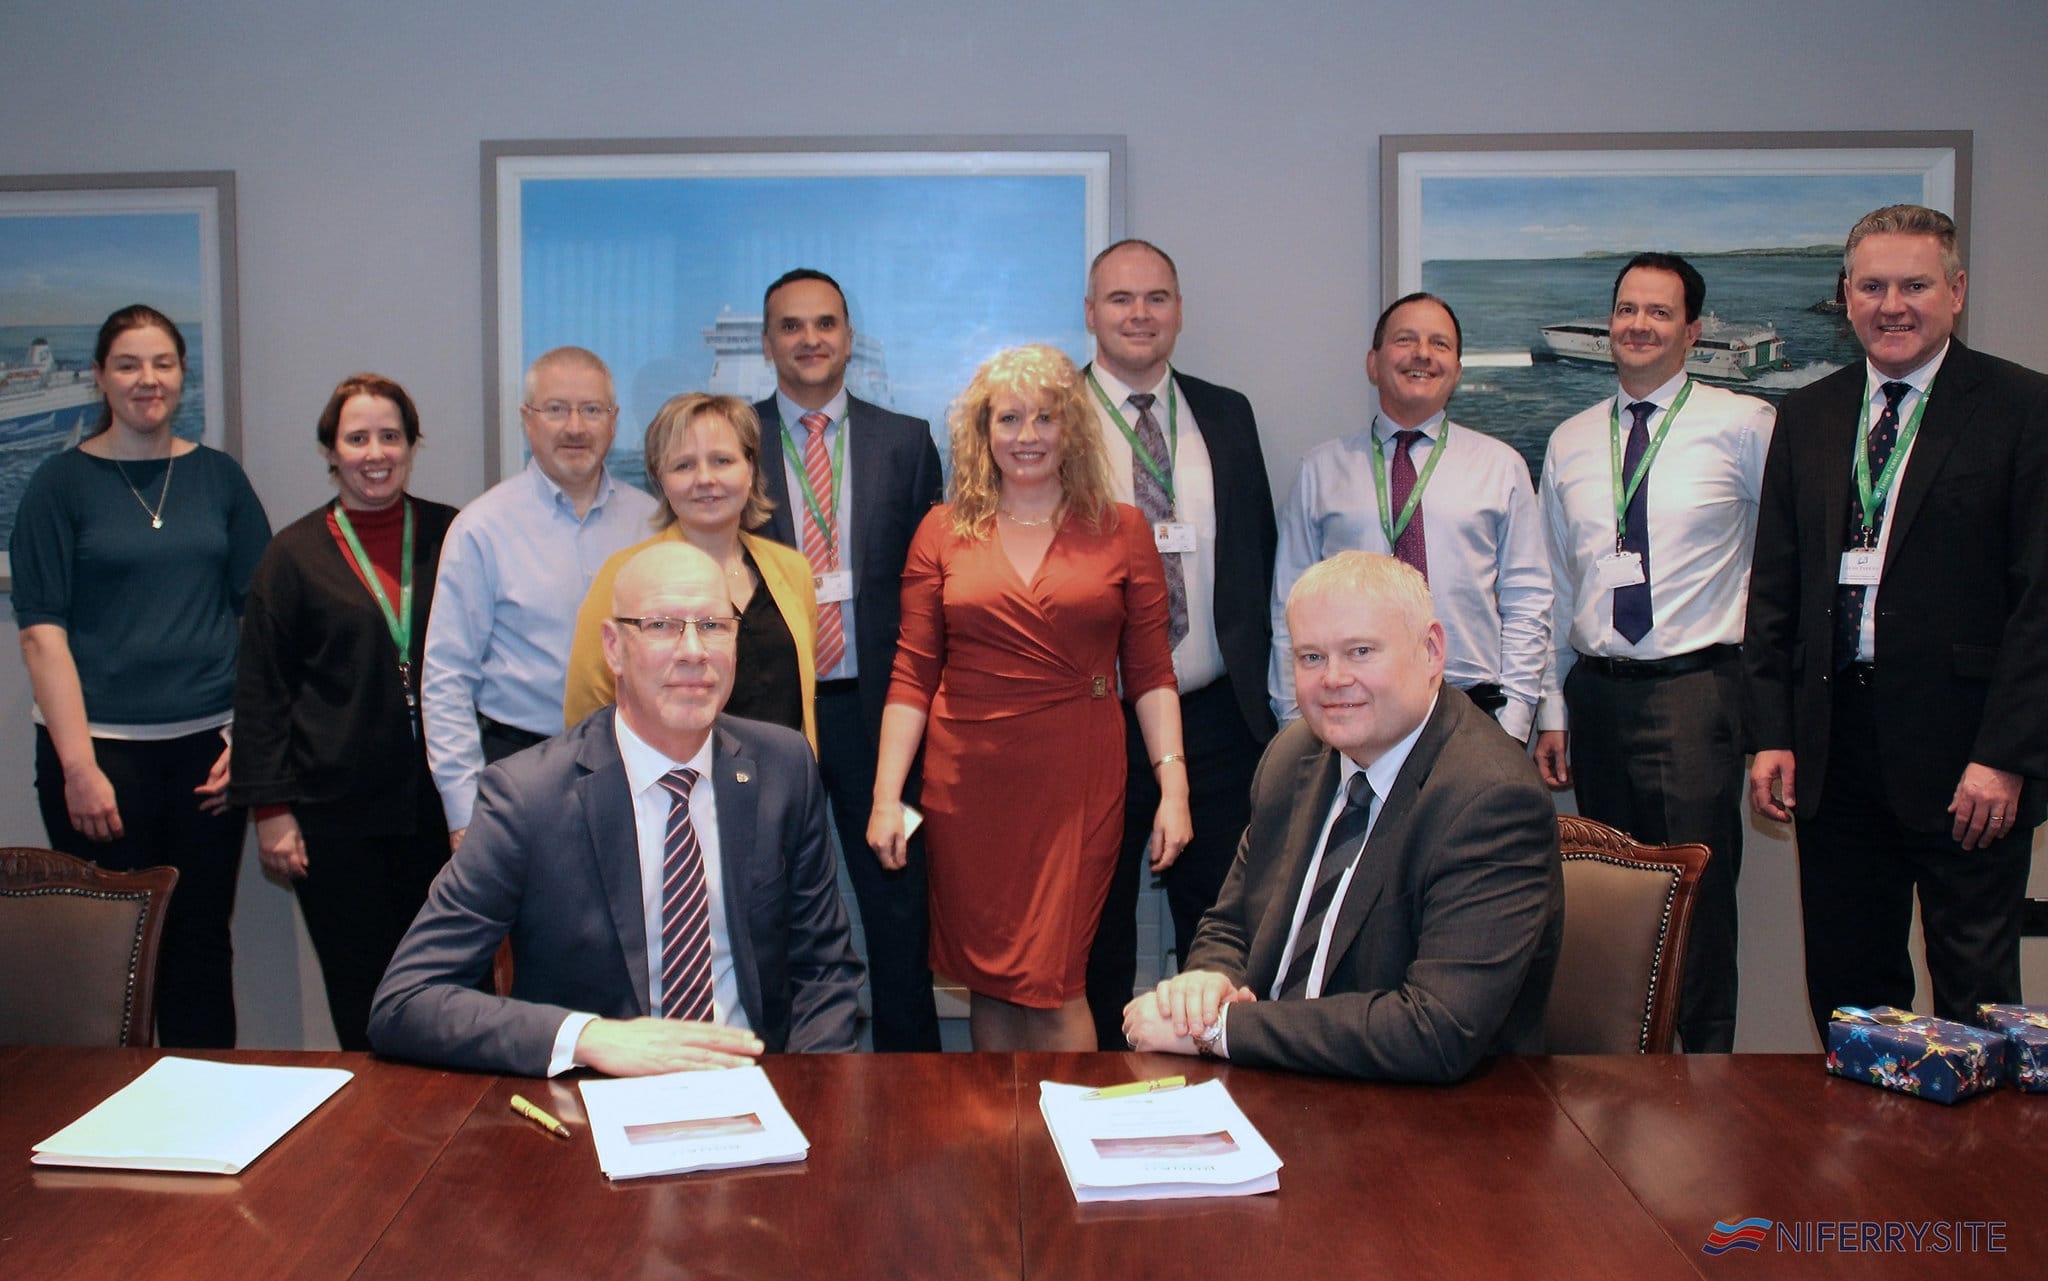 Irish Ferries sign a contact with Hogia for the supply of a new passenger and freight booking system. Irish Ferries.